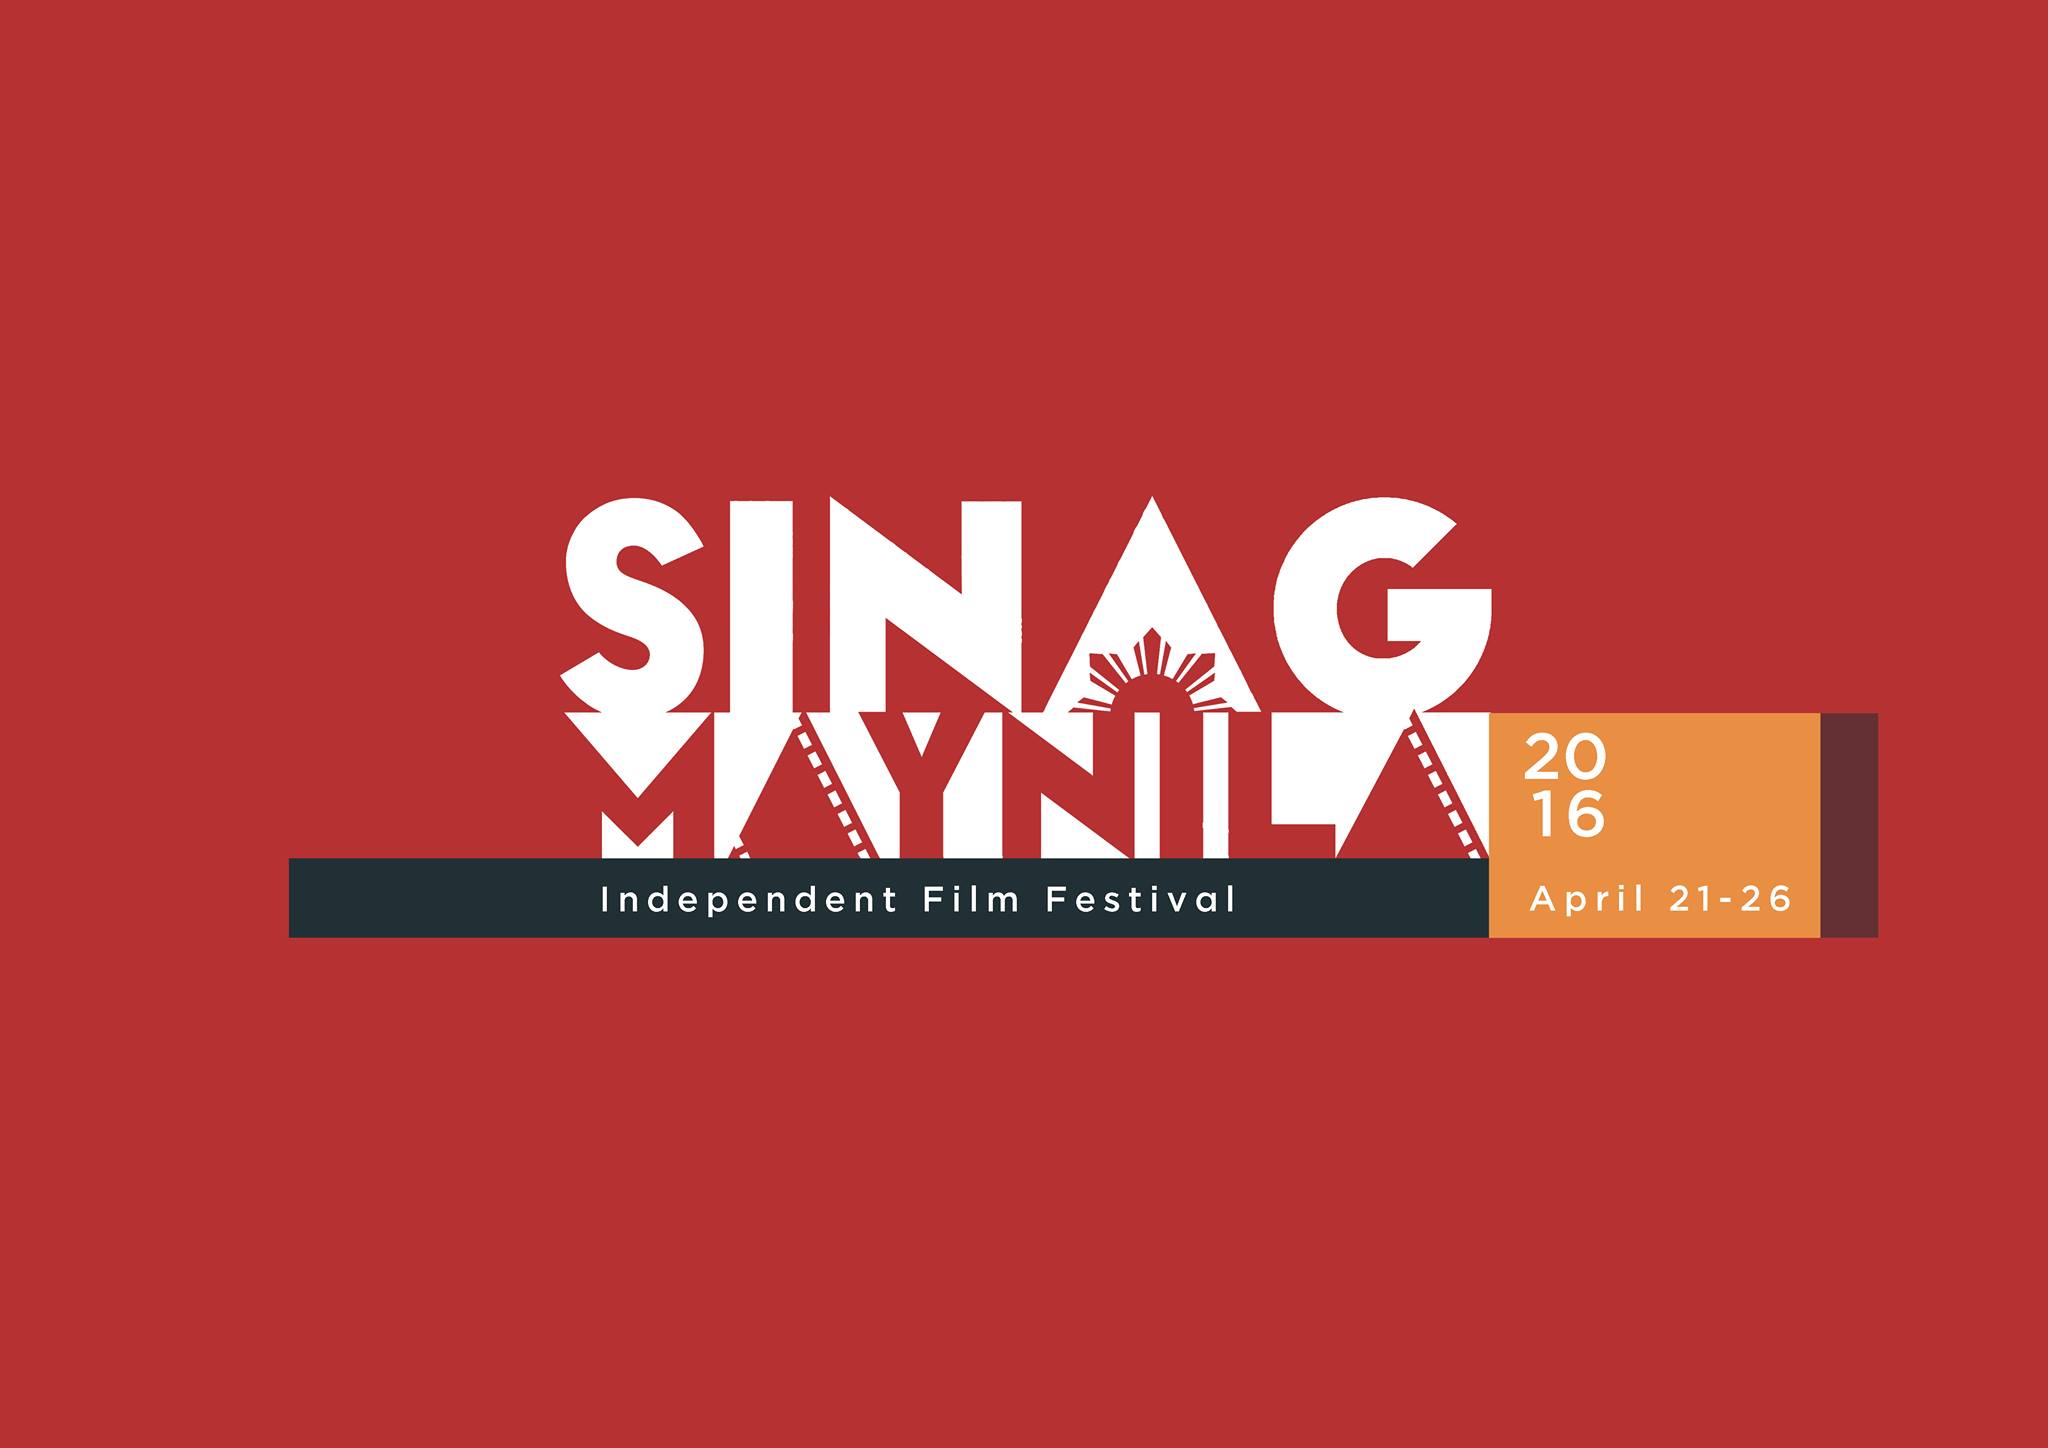 The Ultimate Guide to the 2016 Sinag Maynila Independent Film Festival